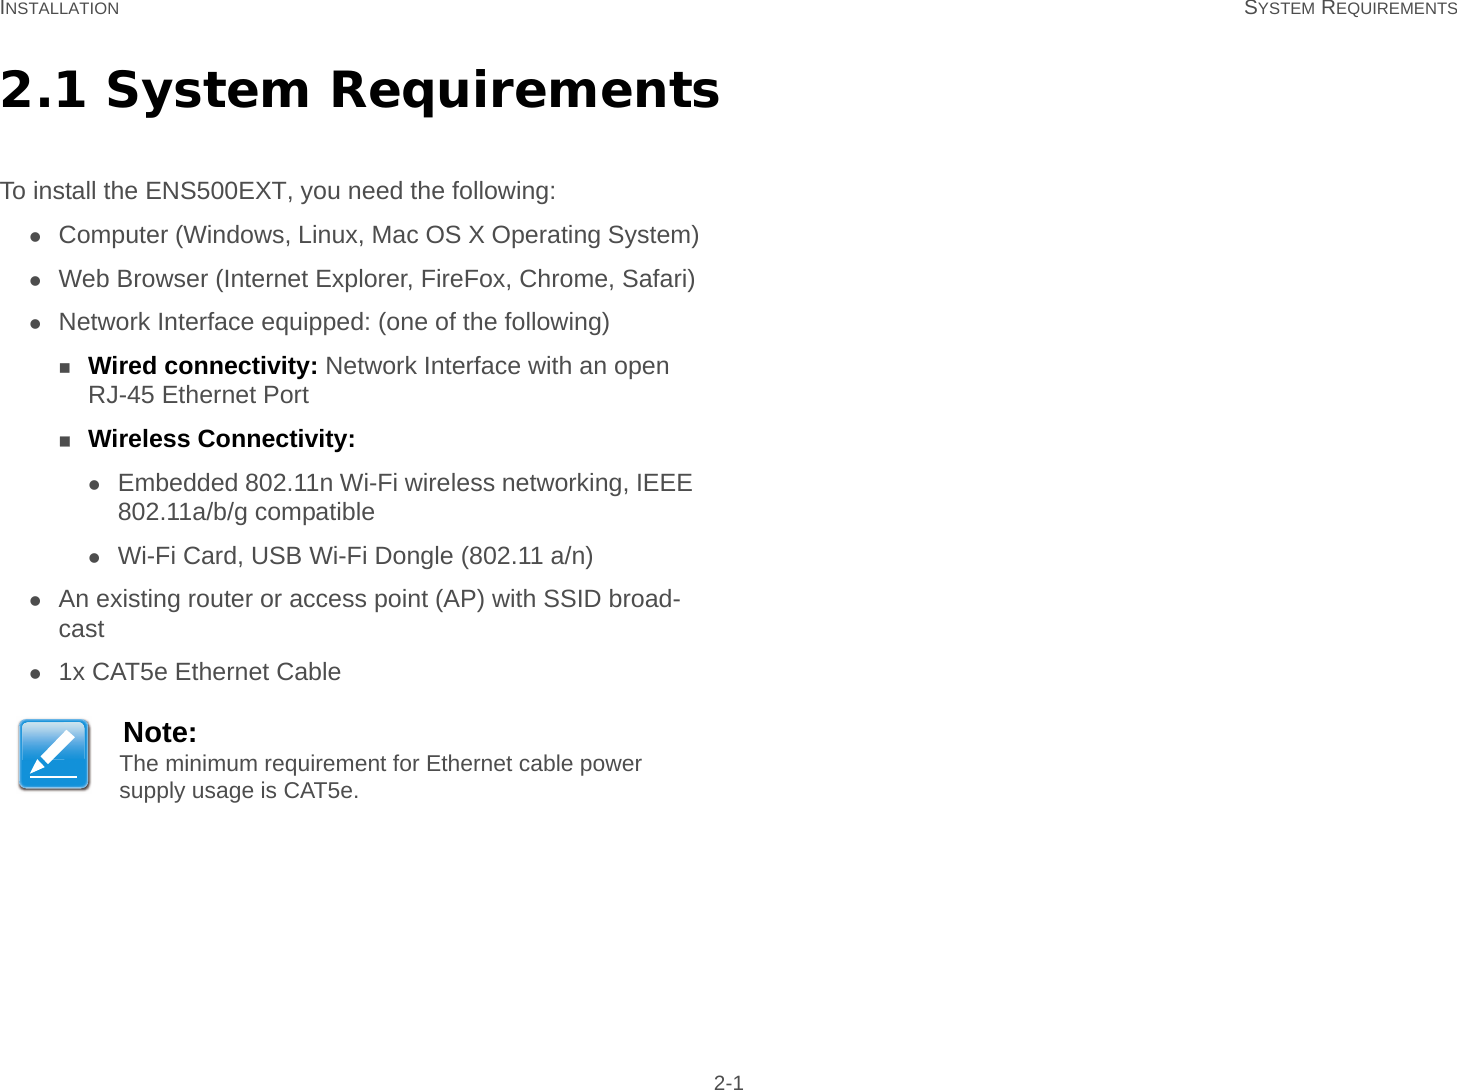 INSTALLATION SYSTEM REQUIREMENTS 2-12.1 System RequirementsTo install the ENS500EXT, you need the following:Computer (Windows, Linux, Mac OS X Operating System)Web Browser (Internet Explorer, FireFox, Chrome, Safari)Network Interface equipped: (one of the following)Wired connectivity: Network Interface with an open RJ-45 Ethernet PortWireless Connectivity:Embedded 802.11n Wi-Fi wireless networking, IEEE 802.11a/b/g compatibleWi-Fi Card, USB Wi-Fi Dongle (802.11 a/n)An existing router or access point (AP) with SSID broad-cast1x CAT5e Ethernet CableNote:The minimum requirement for Ethernet cable power supply usage is CAT5e.